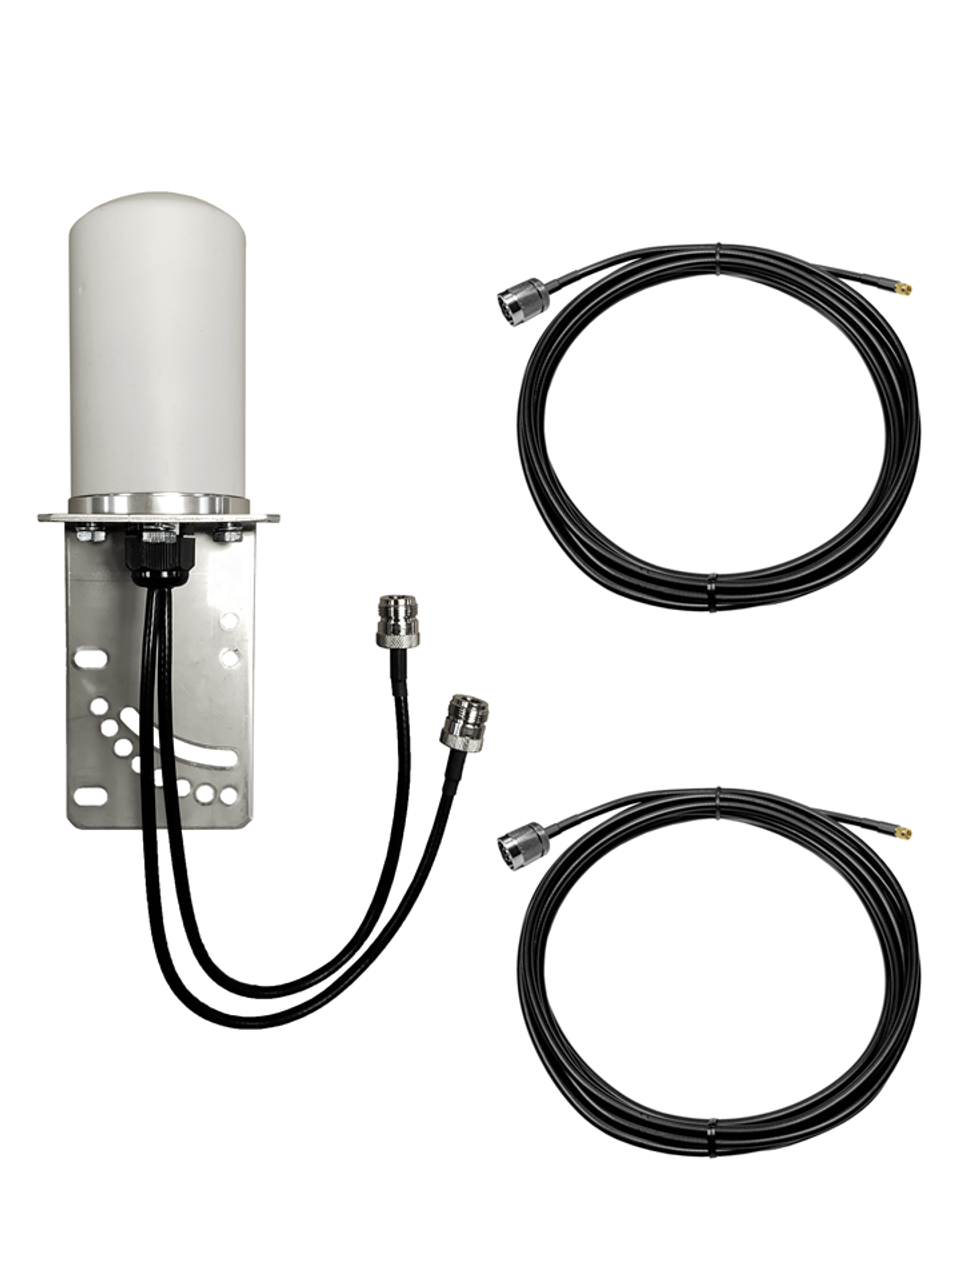 M17B MIMO Omni Directional 2 x Cellular 4G LTE 5G NR IoT M2M Bracket Mount Antenna w/Coax Cable Kit Options